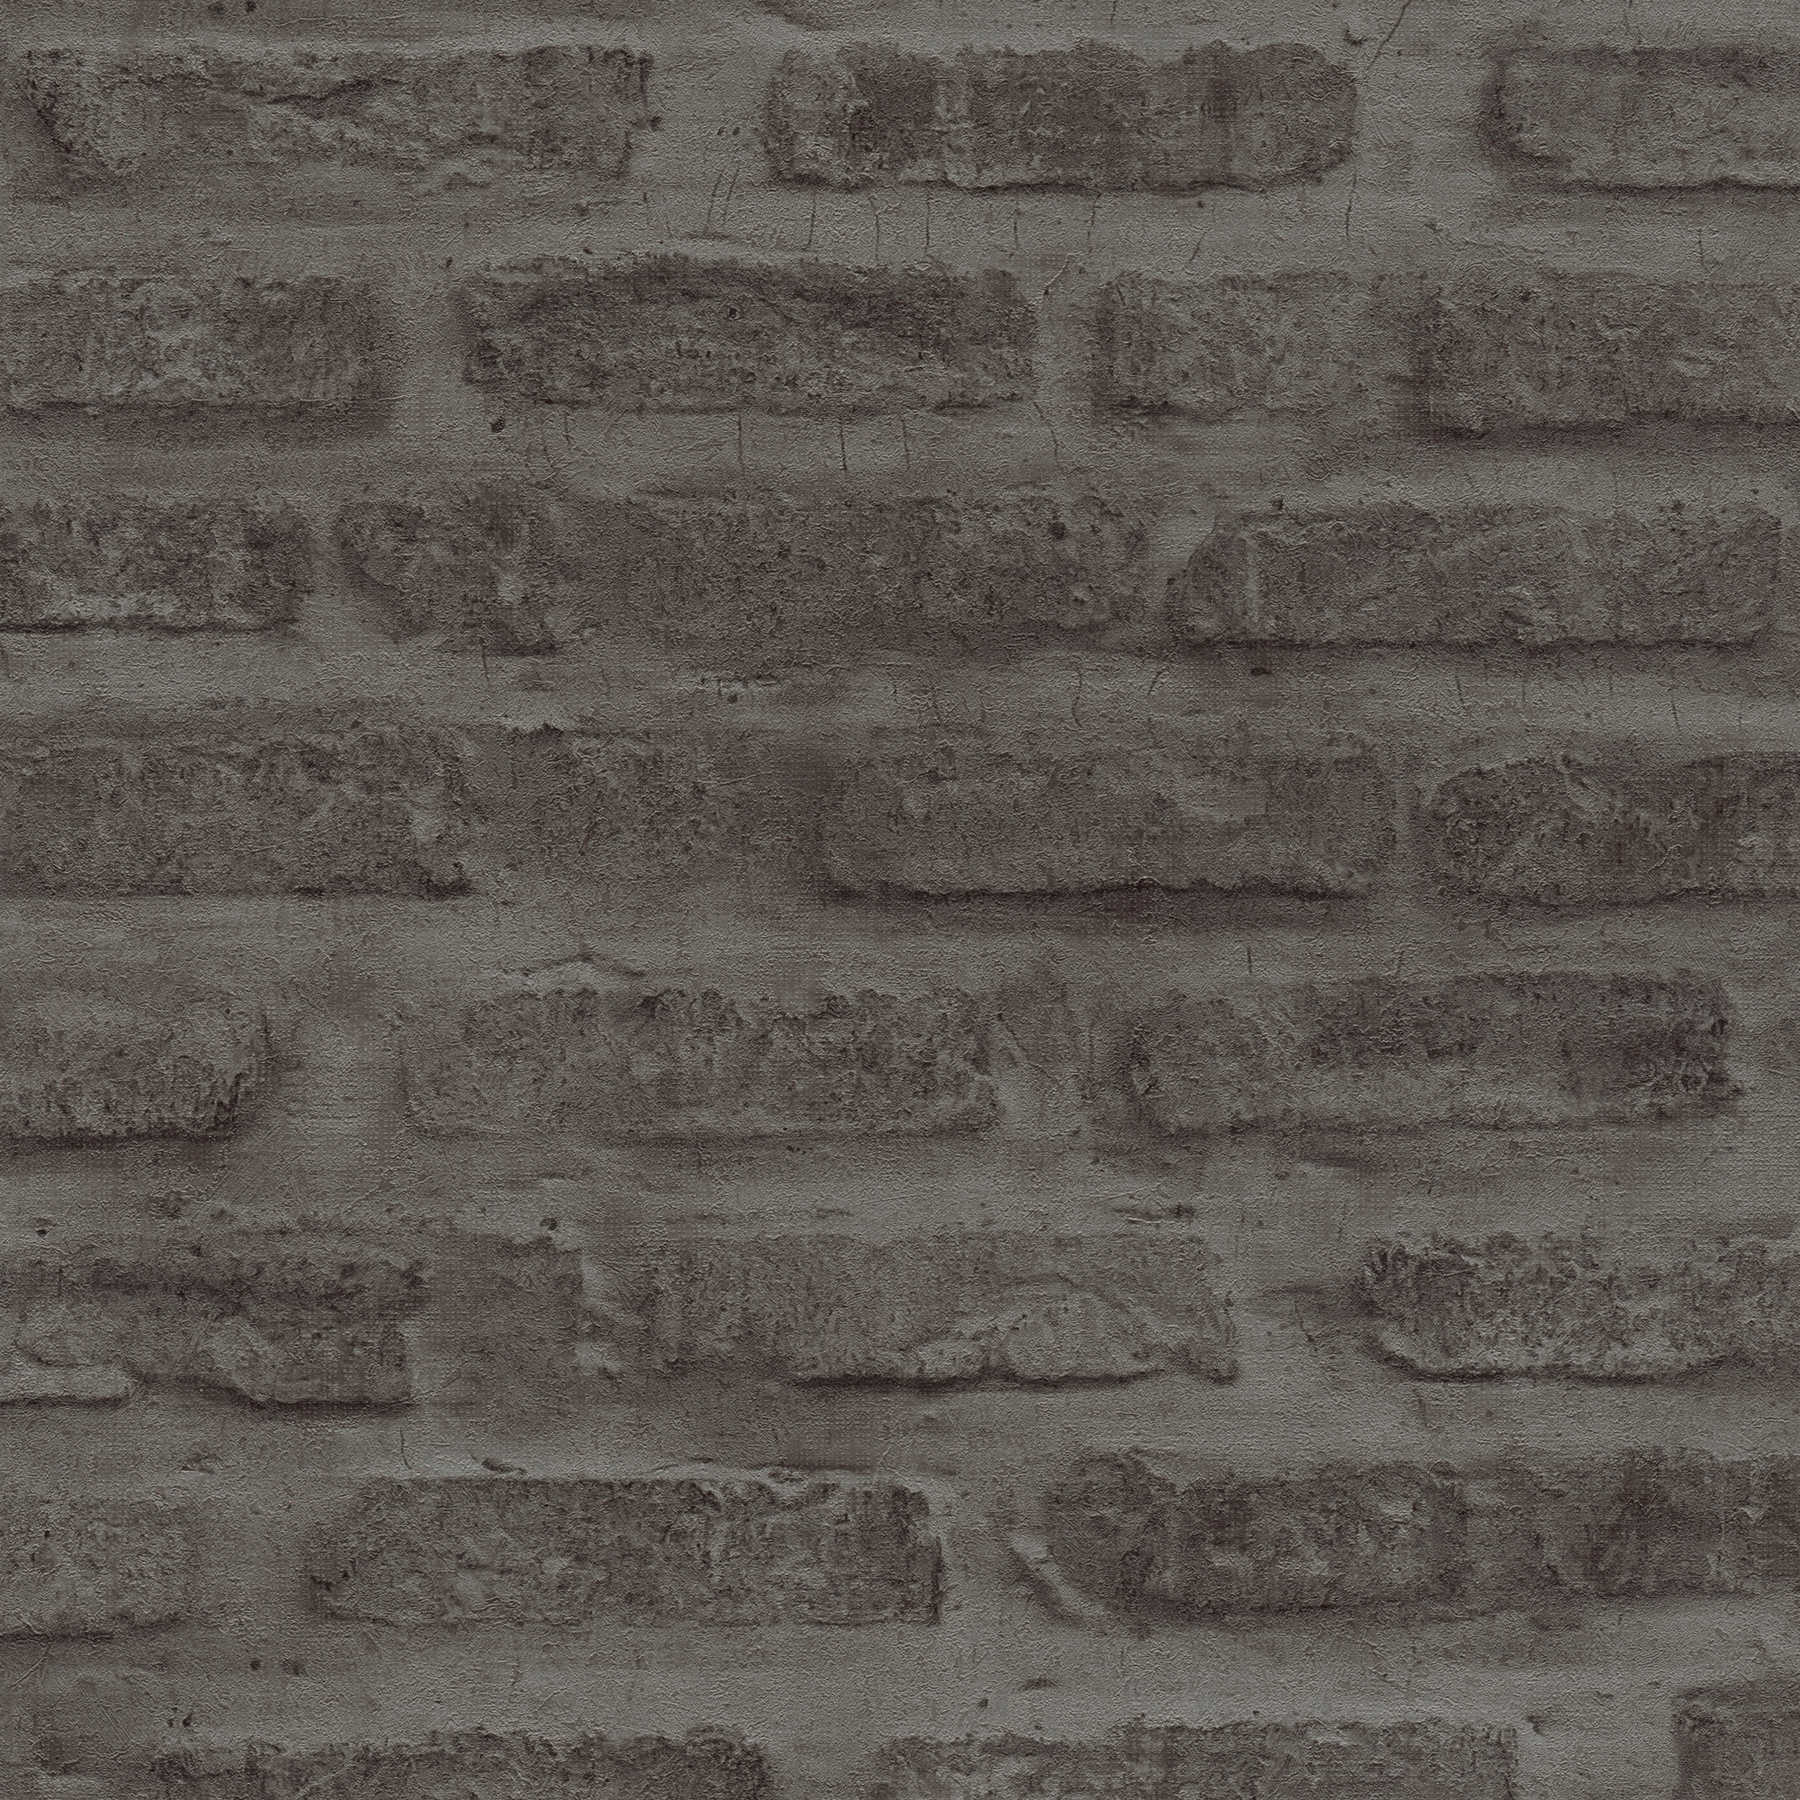             Anthracite non-woven wallpaper with stone look & brick wall - grey, black
        